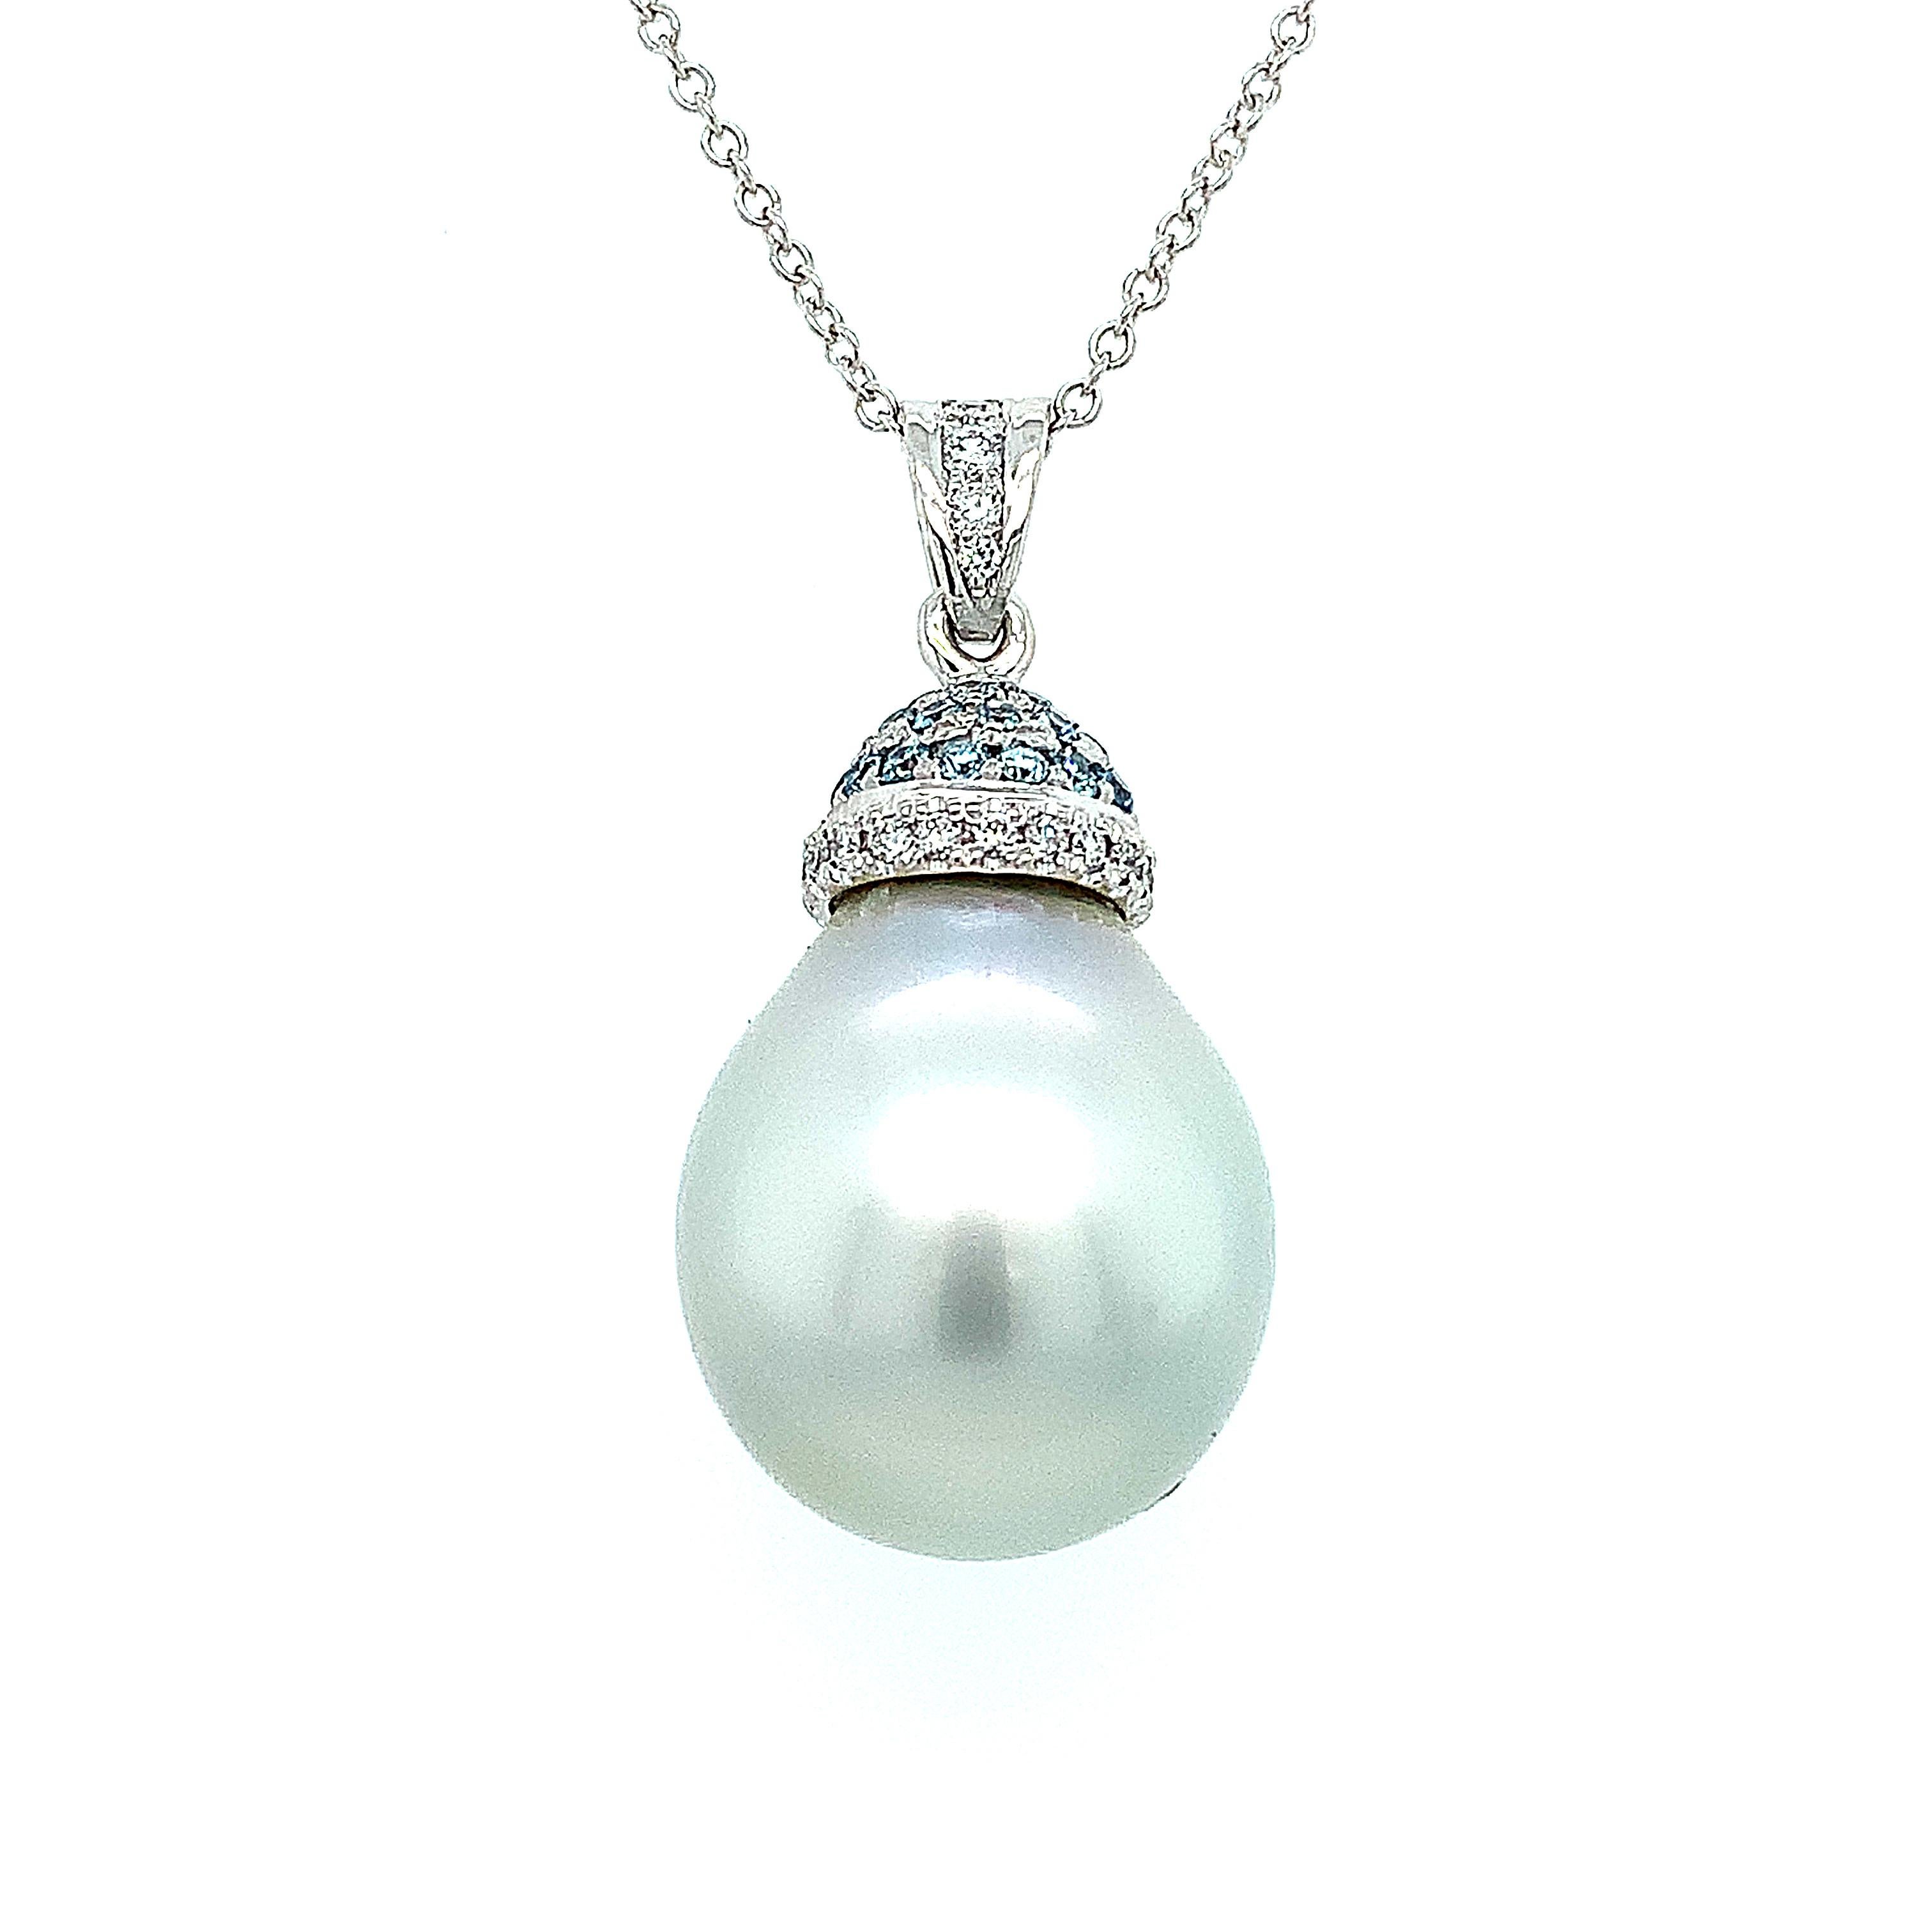 Tahitian pearl and diamonds pear art deco drop pendant 18k white gold
Pear shaped Tahitian cultured pearl light grey blue shade measured approximately 22x16mm with round cut diamonds total weight 0.78ct F colour VS1 clarity
Blue radiated diamonds